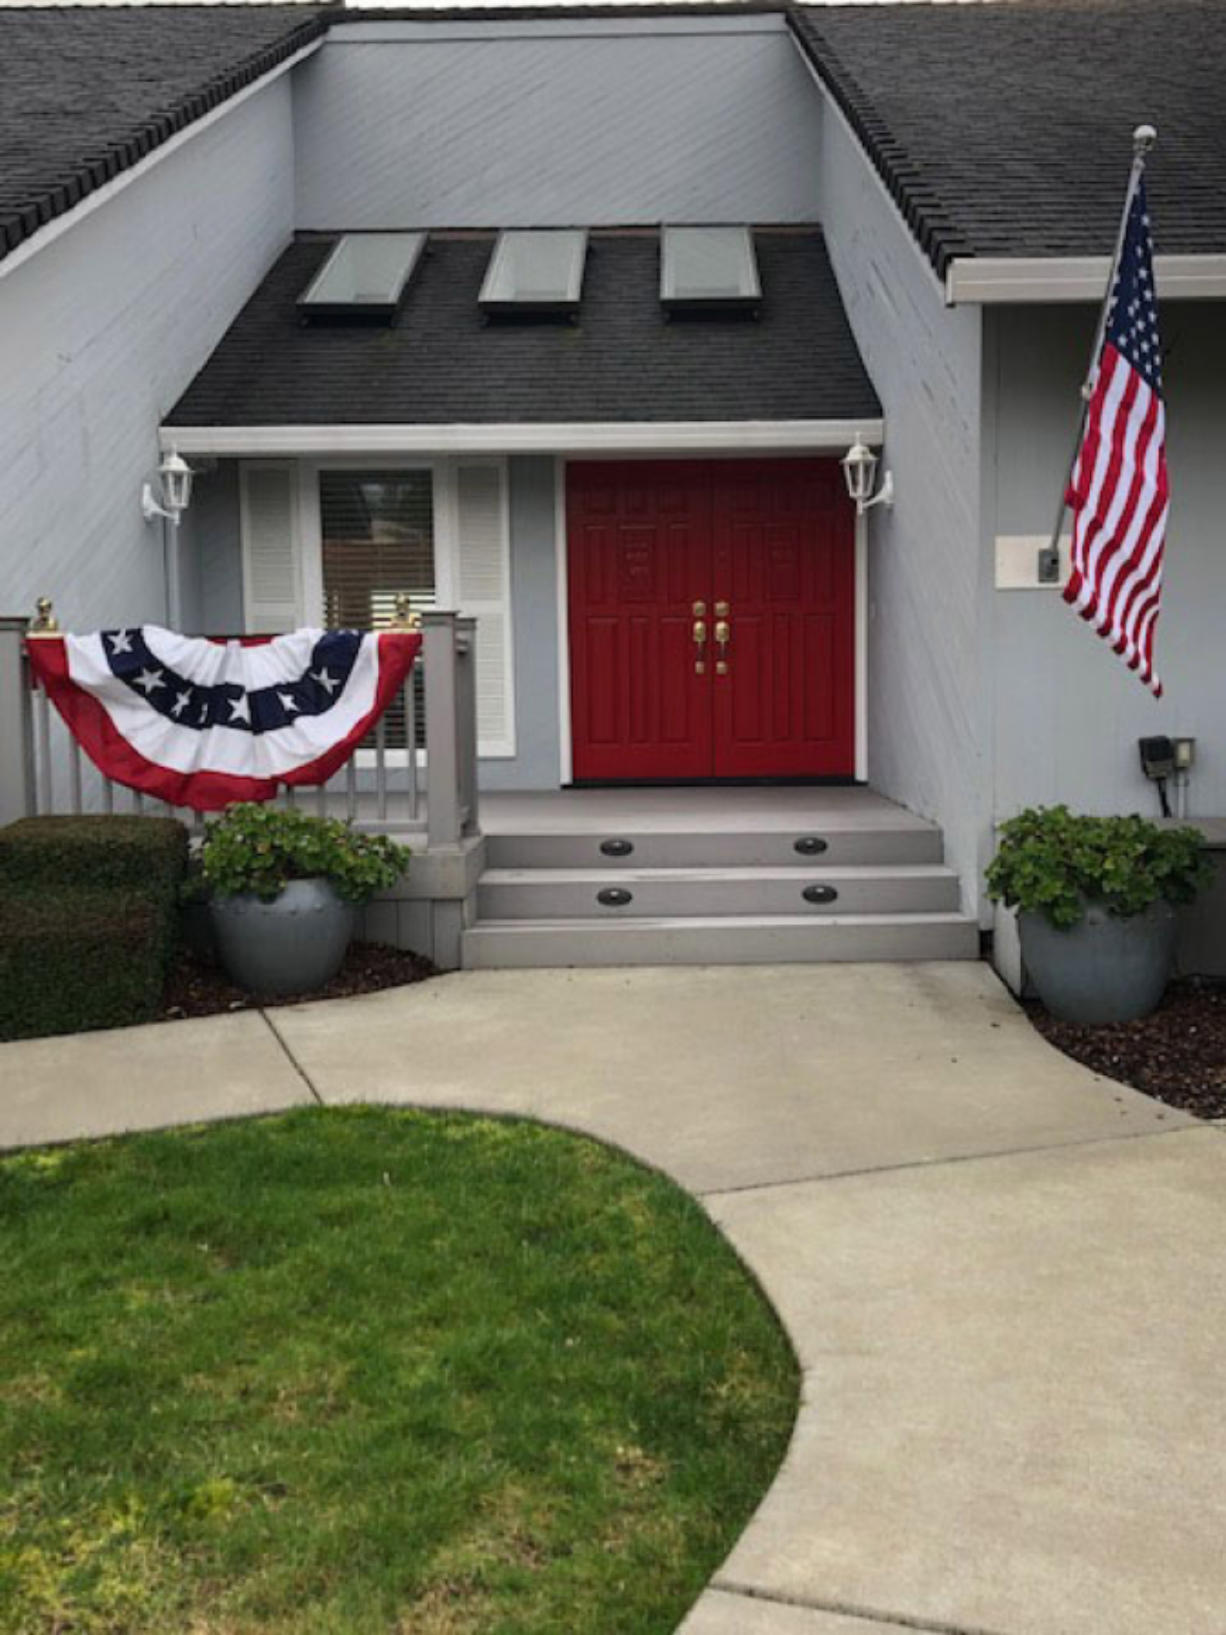 Lake Shore Resident Decorates Home For Inauguration The Columbian